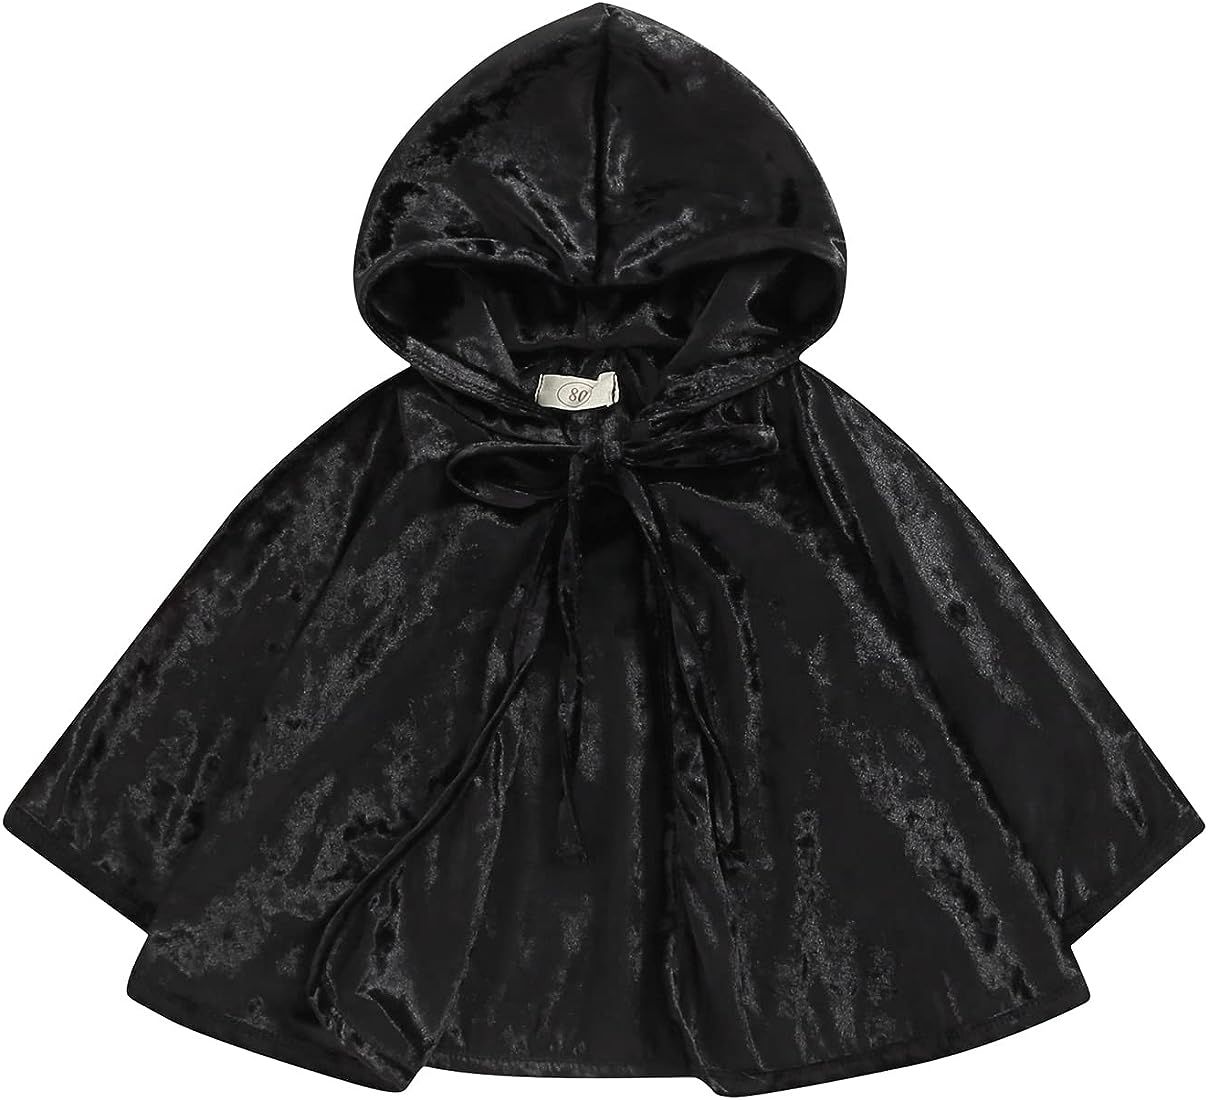 RSRZRCJ Kids Halloween Cape Baby Boy Girl Lace-Up Velvet Hooded Cloak Wizard Witch Role Play Party C | Amazon (US)